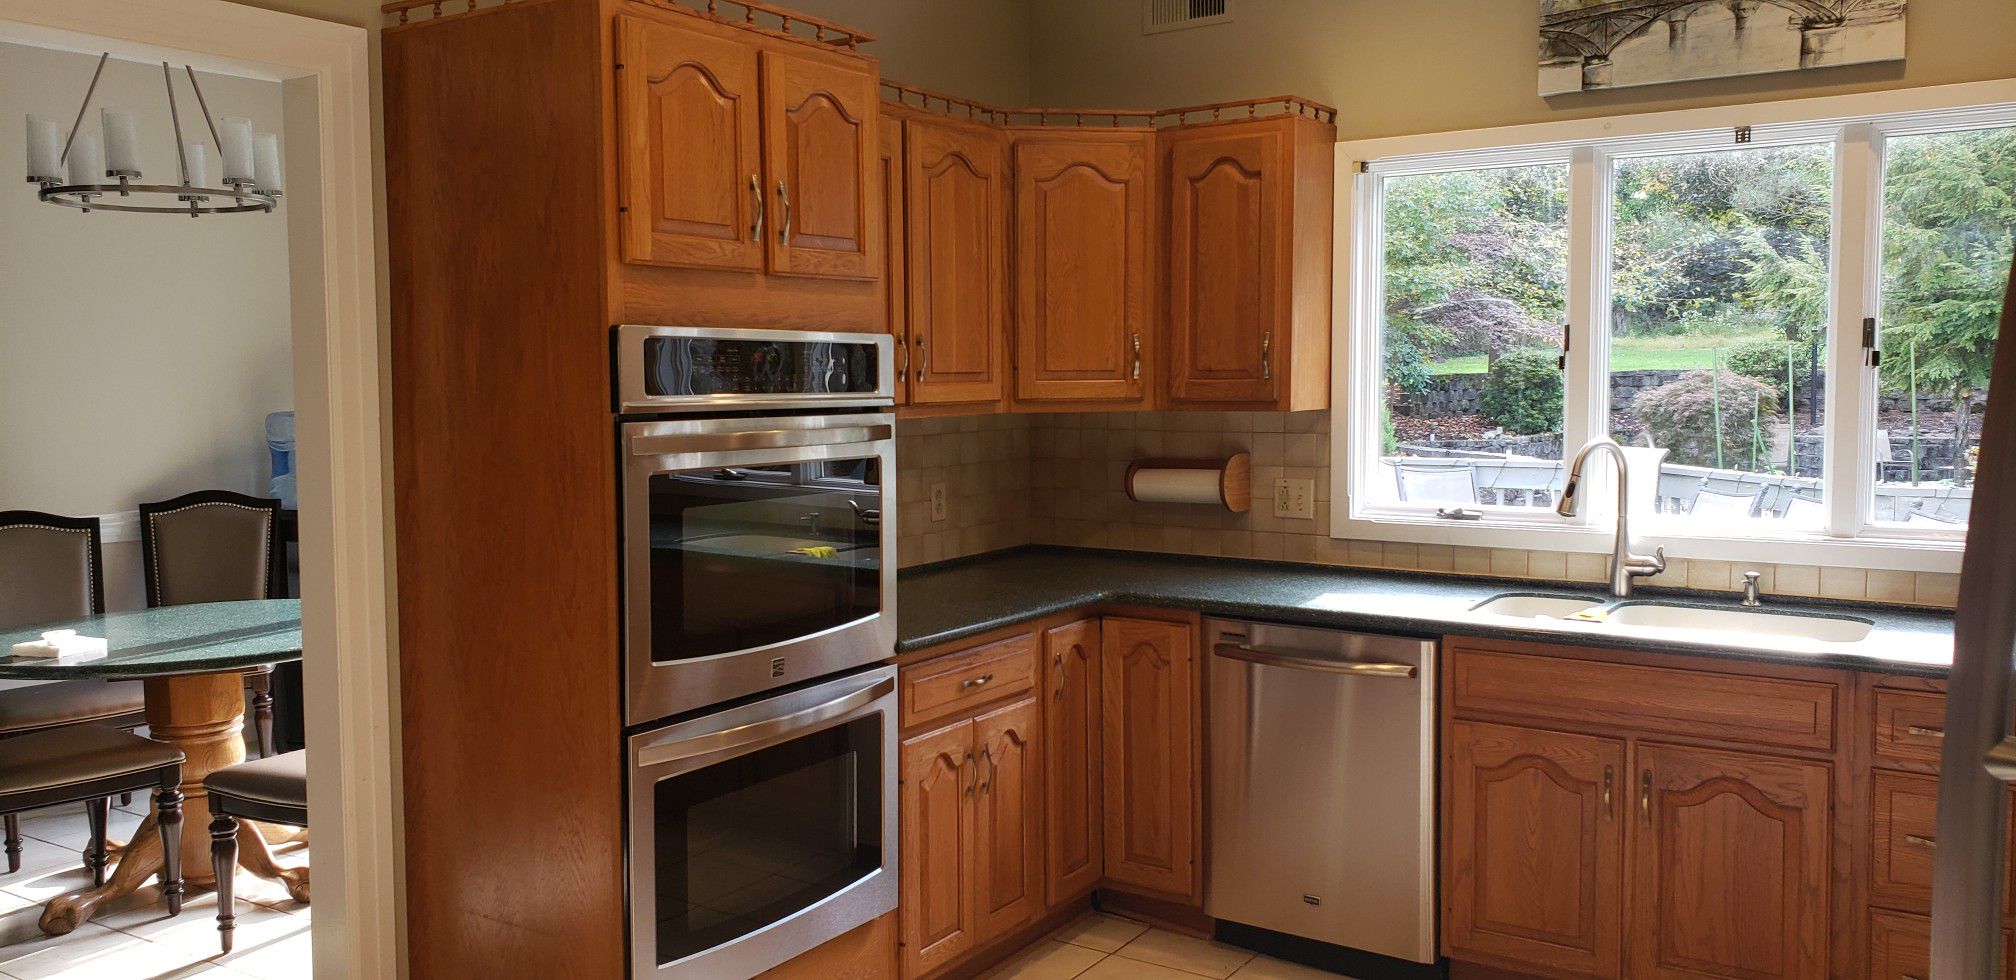 Used solid oak kitchen cabinets